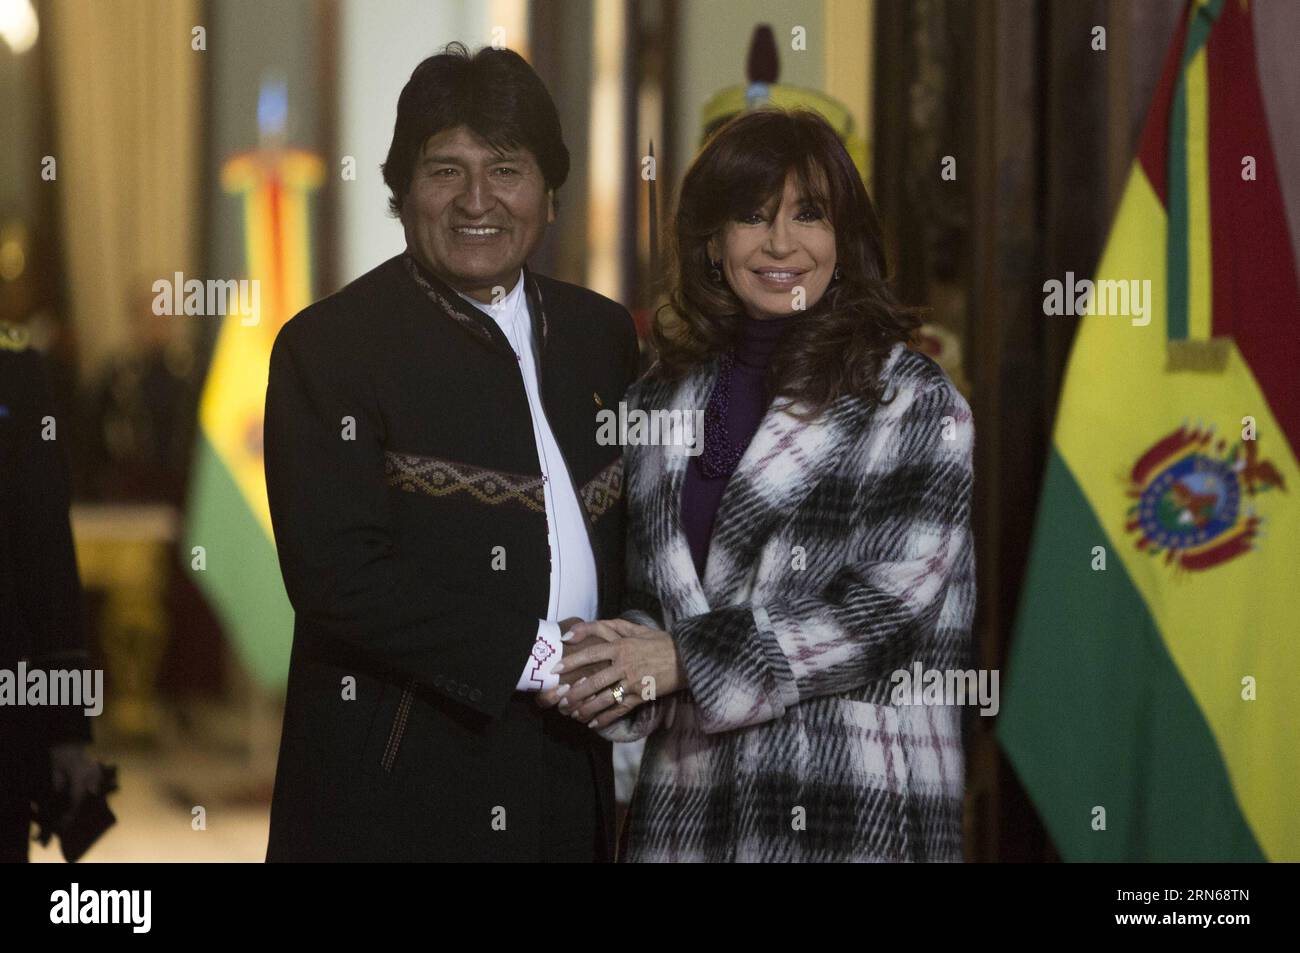 150716 -- BUENOS AIRES, July 15, 2015 -- Argentina s President Cristina Fernandez de Kirchner R, meets with her Bolivia s counterpart Evo Morales L, at Casa Rosada in Buenos Aires, capital of Argentina, on July 15, 2015. Morales visited Argentina for the signinig of bilateral agreements and to inaugurate the monument of Juana Azurduy donated by Bolivian government, according to local press. Martin Zabala ARGENTINA-BUENOS AIRES-BOLIVIA-PRESIDENT-VISIT e MARTINxZABALA PUBLICATIONxNOTxINxCHN Stock Photo